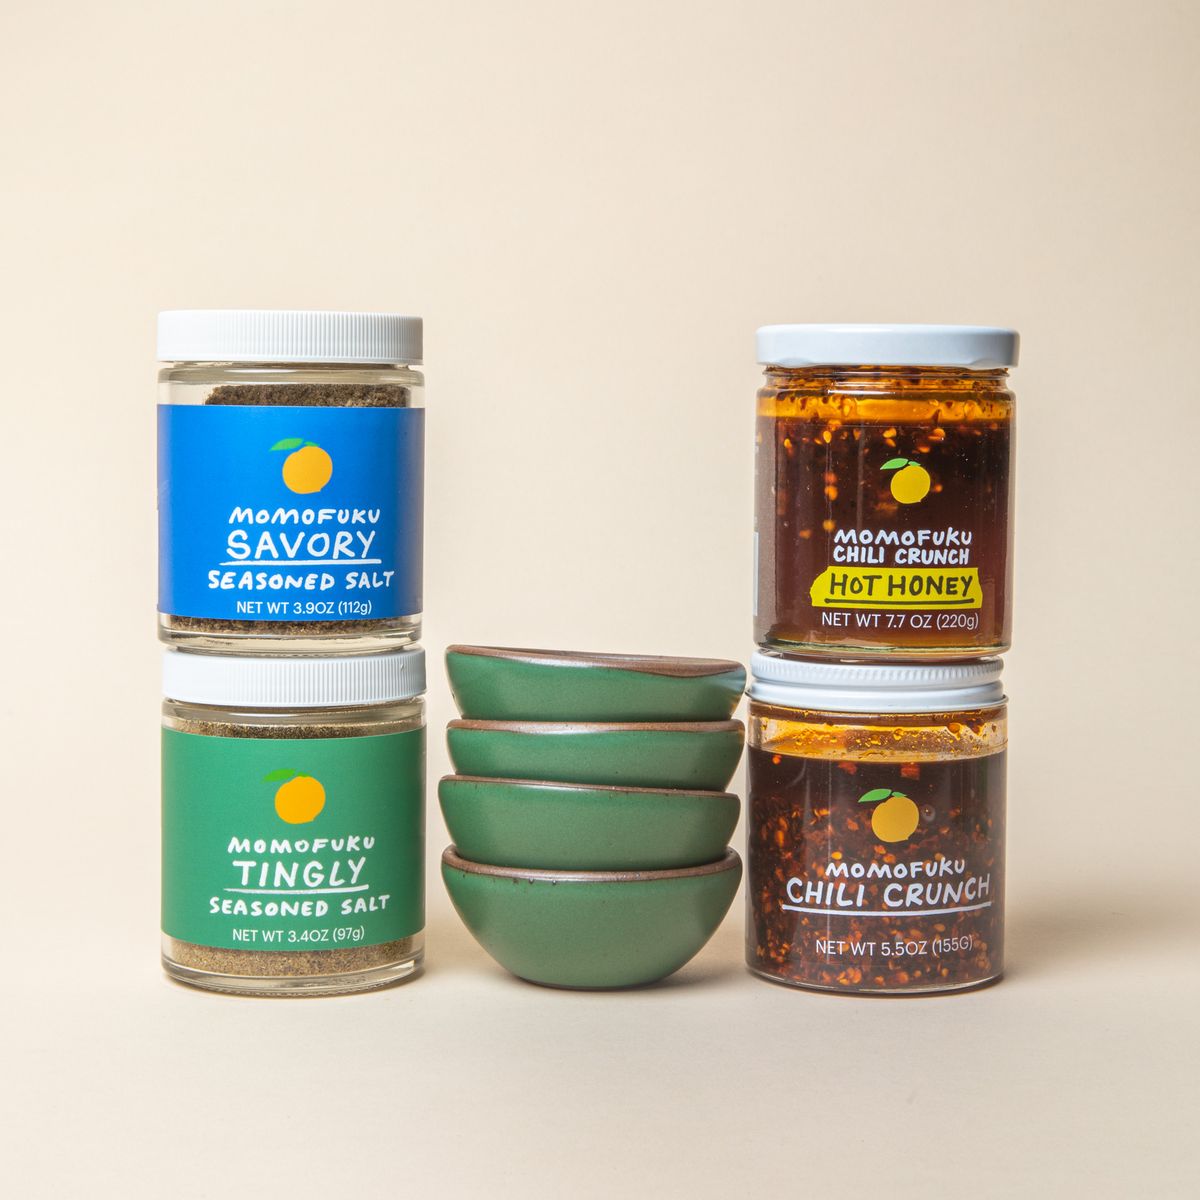 4 stacked little ceramic bowls in a cool green color surrounded by 4 jars of Momofuku seasoned salts and chili crunch.